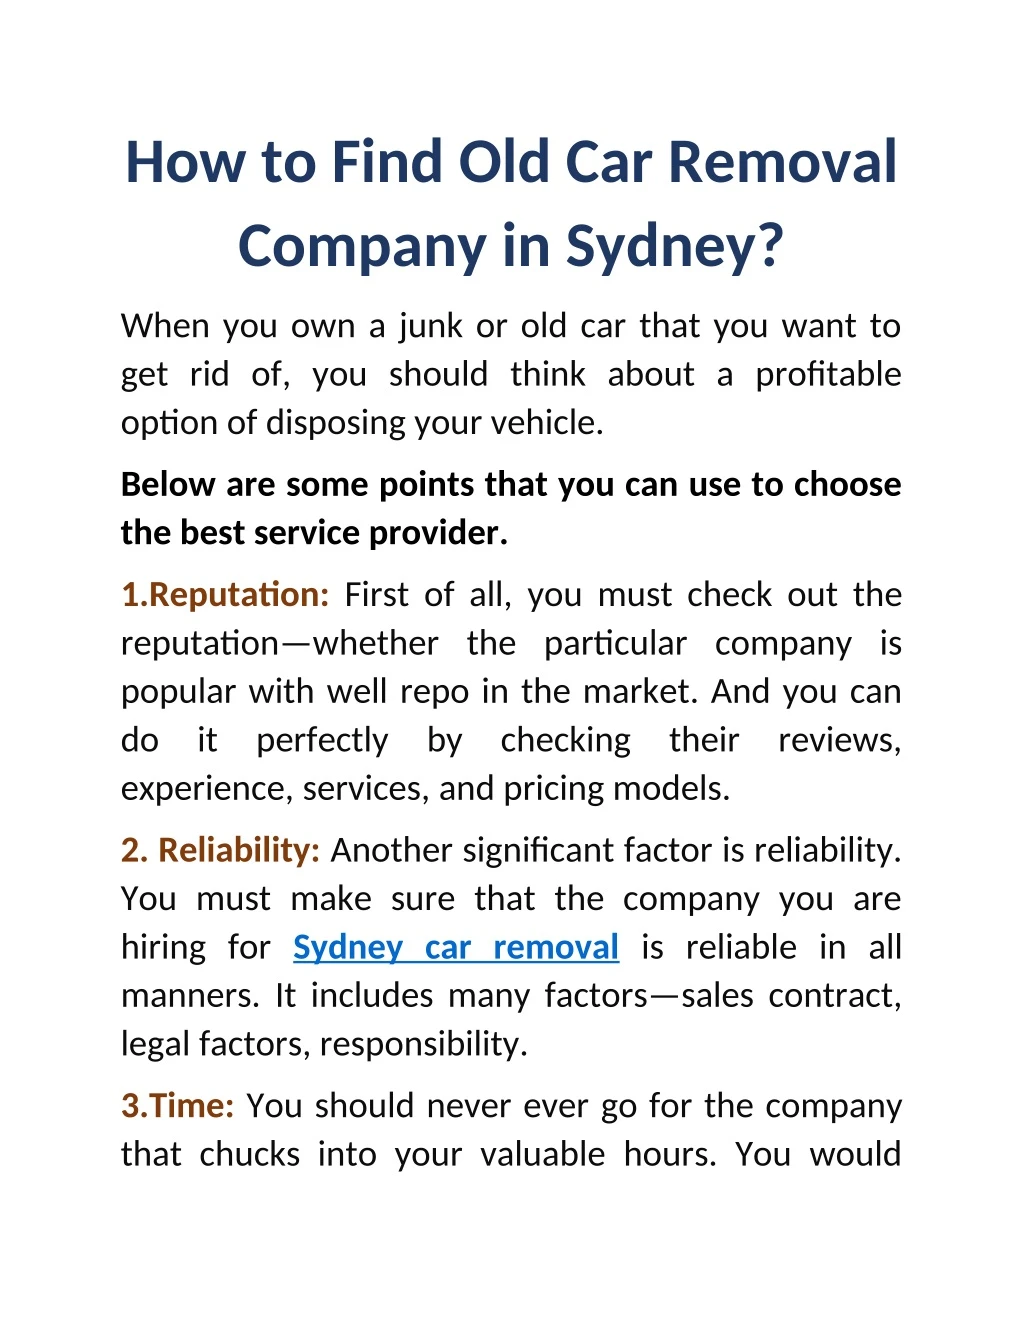 how to find old car removal company in sydney